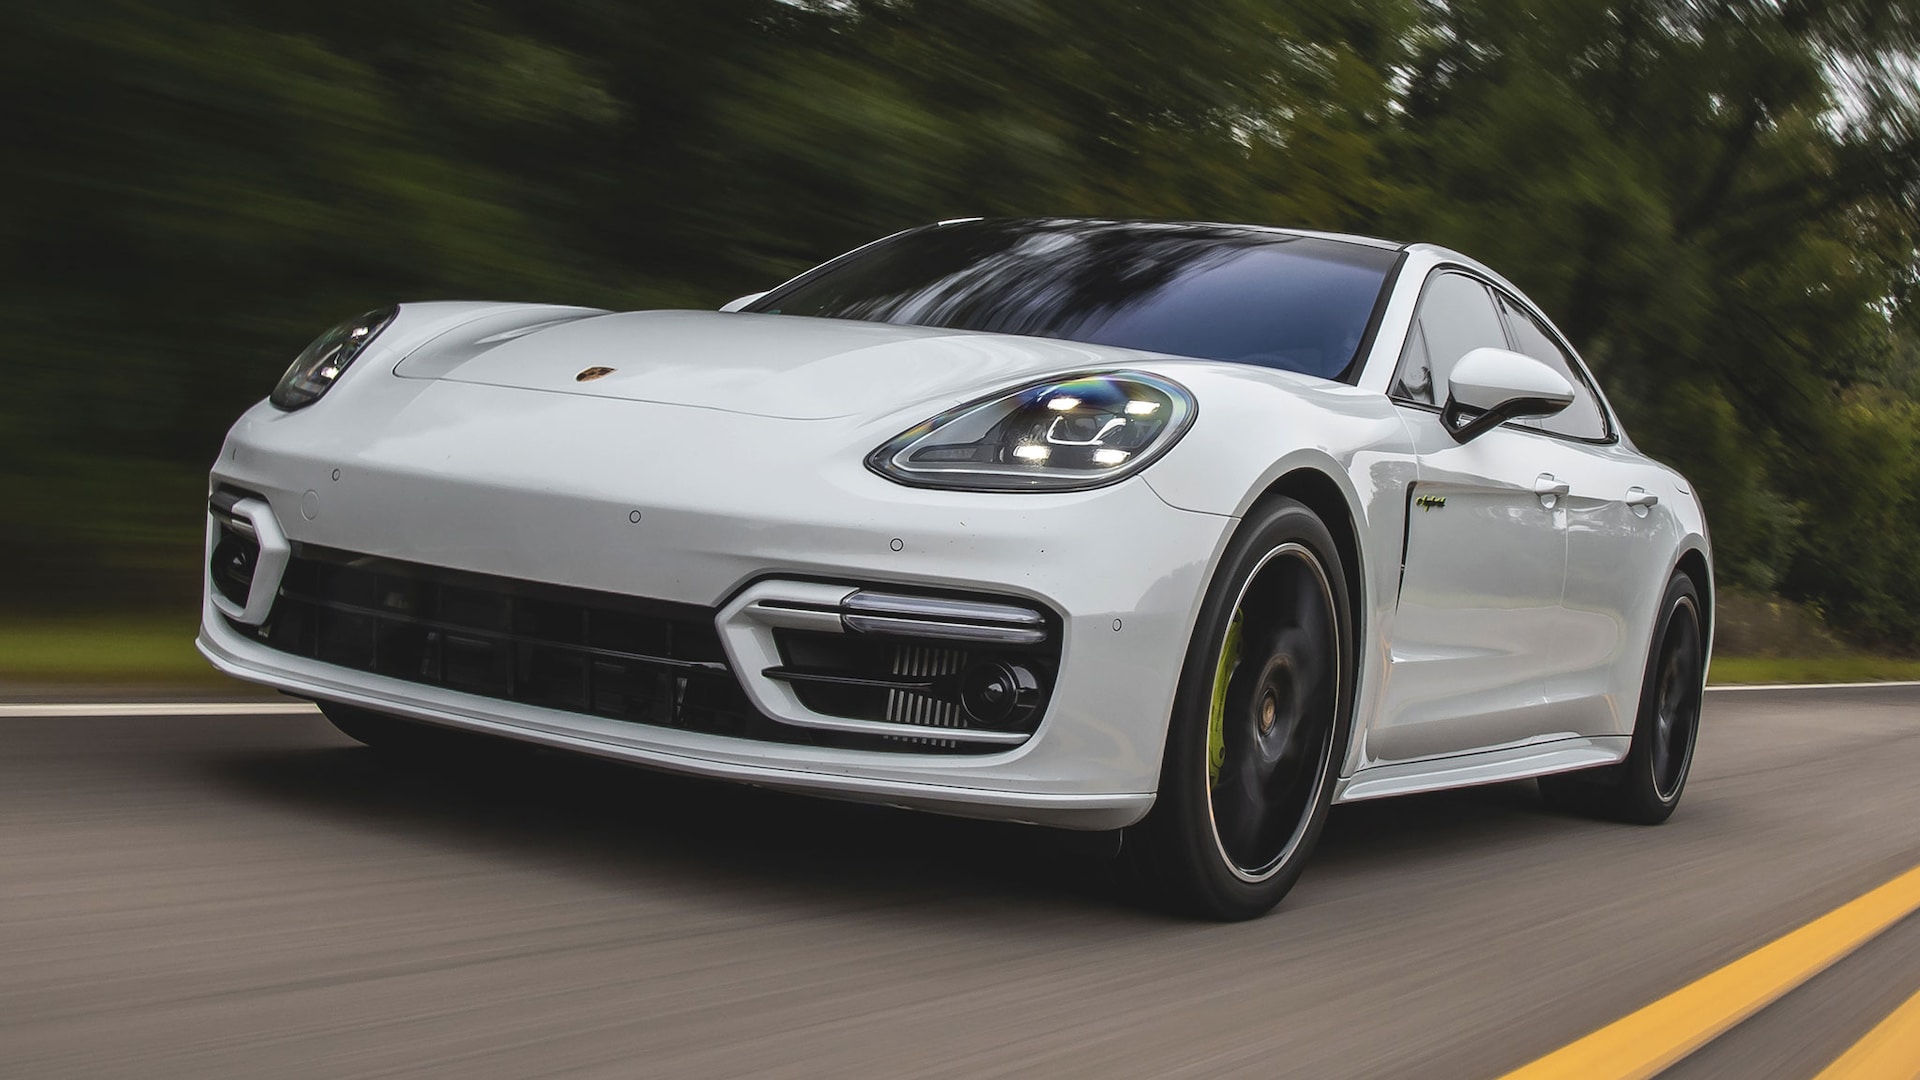 2021 Porsche Panamera 4S E-Hybrid First Drive: A Turbo for the Geek Squad